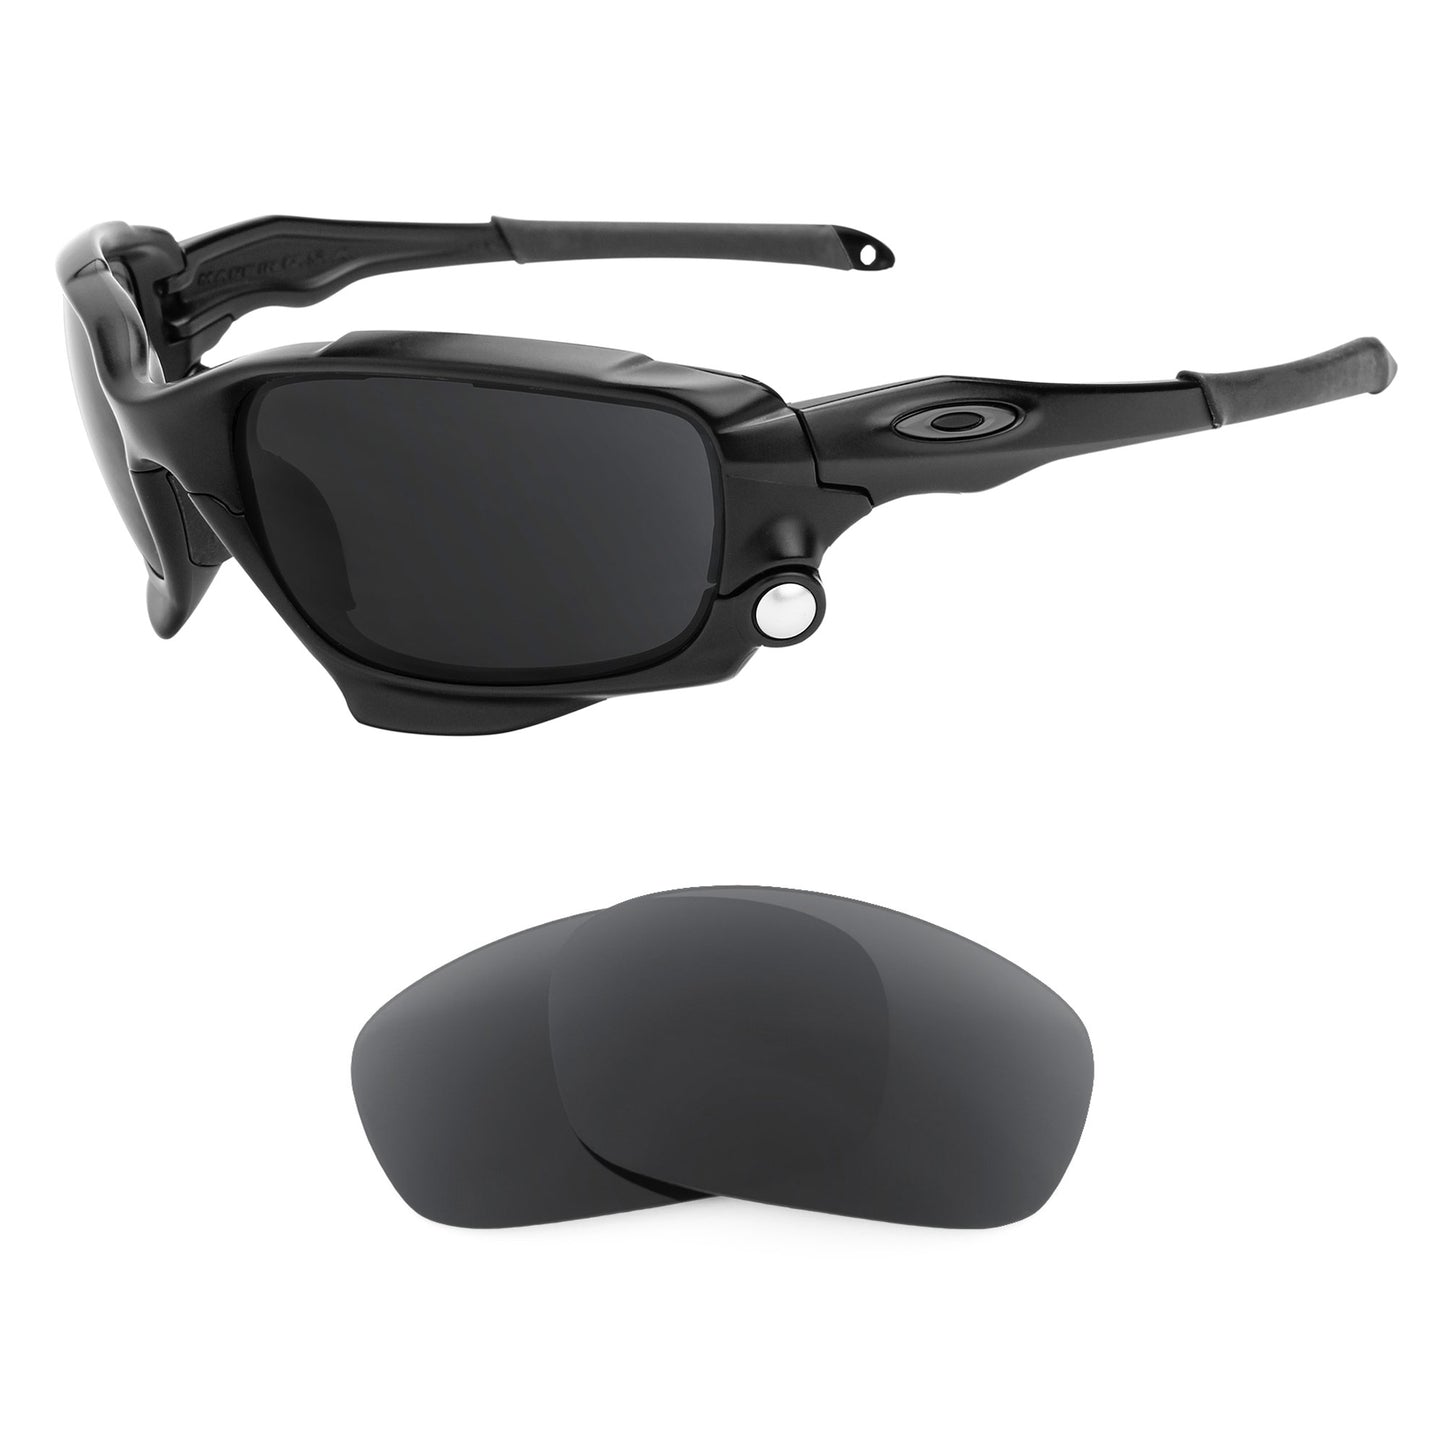 Oakley Racing Jacket sunglasses with replacement lenses